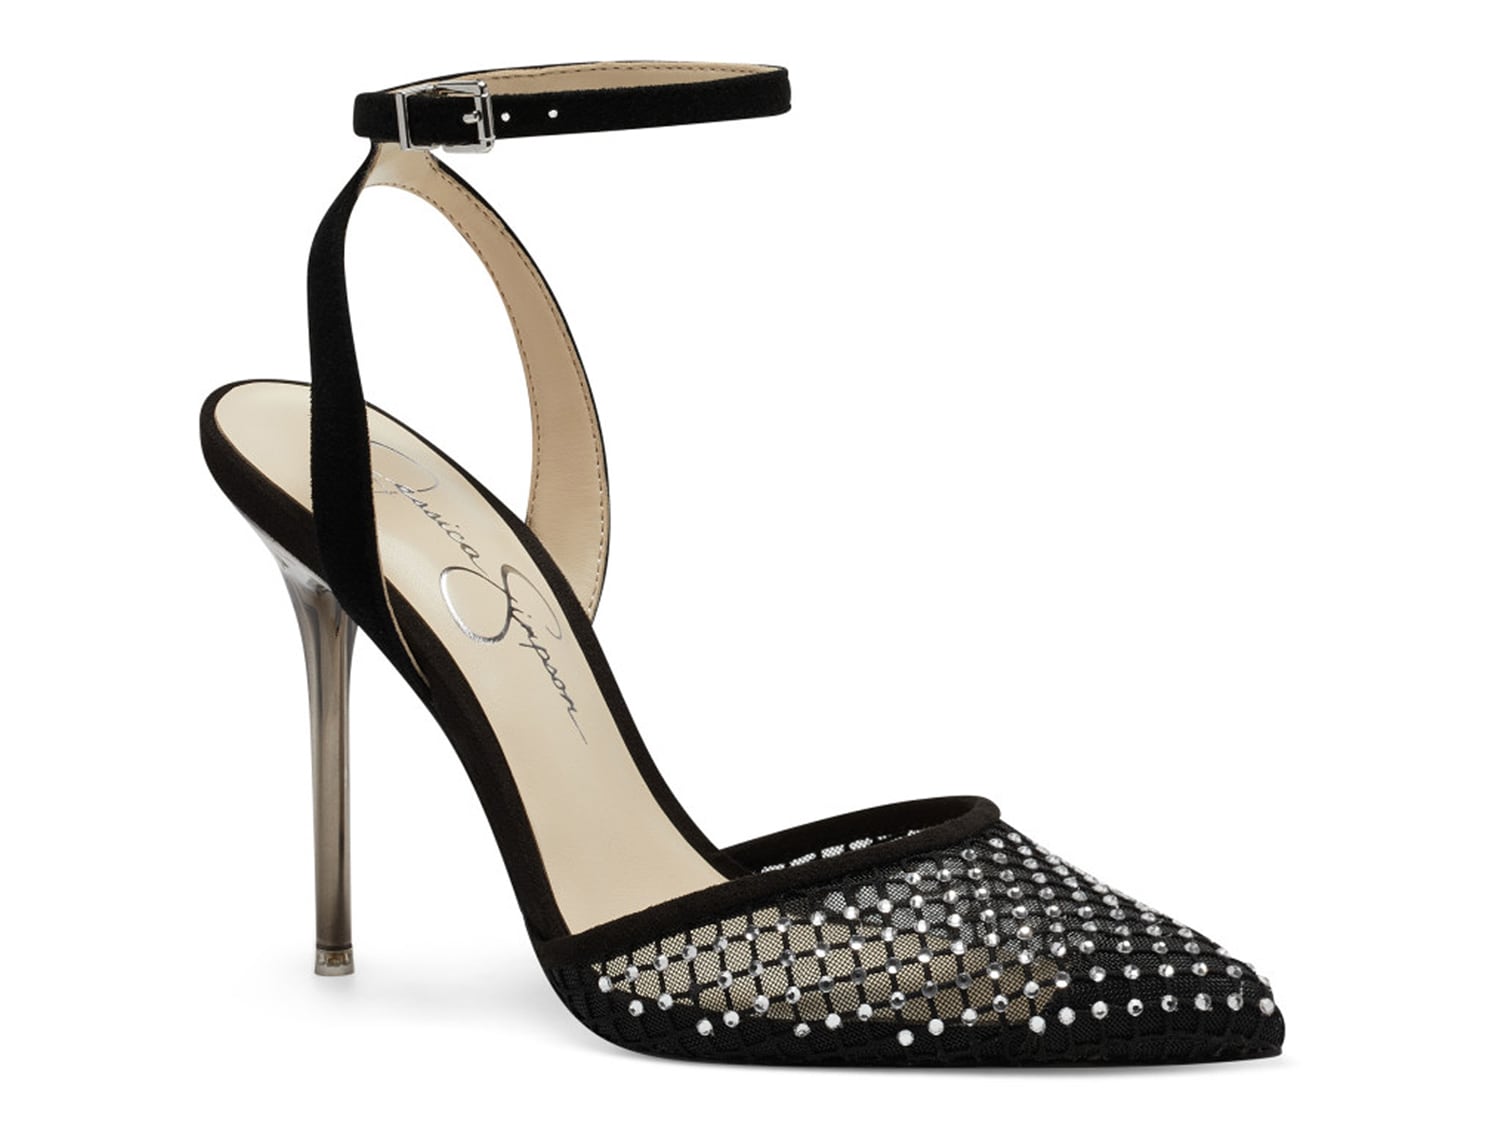 Jessica Simpson Pirrie Pump - Free Shipping | DSW